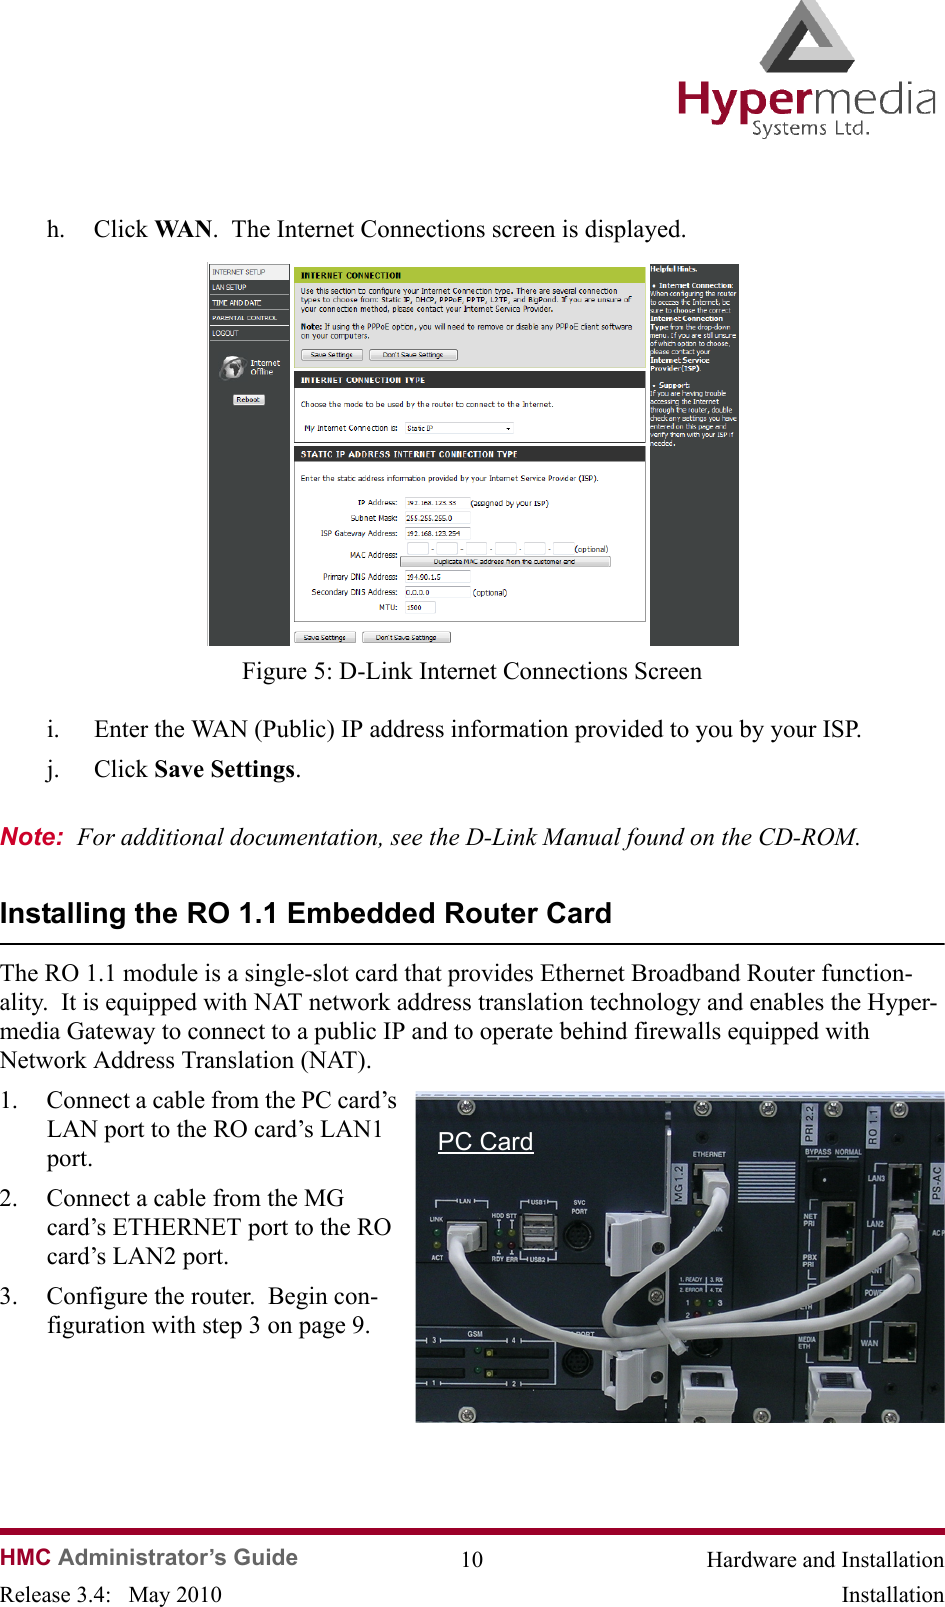   HMC Administrator’s Guide 10 Hardware and InstallationRelease 3.4:   May 2010 Installationh. Click WA N .  The Internet Connections screen is displayed.              Figure 5: D-Link Internet Connections Screeni. Enter the WAN (Public) IP address information provided to you by your ISP.j. Click Save Settings.  Note:  For additional documentation, see the D-Link Manual found on the CD-ROM.Installing the RO 1.1 Embedded Router CardThe RO 1.1 module is a single-slot card that provides Ethernet Broadband Router function-ality.  It is equipped with NAT network address translation technology and enables the Hyper-media Gateway to connect to a public IP and to operate behind firewalls equipped with Network Address Translation (NAT).1. Connect a cable from the PC card’s LAN port to the RO card’s LAN1 port.   2. Connect a cable from the MG card’s ETHERNET port to the RO card’s LAN2 port.3. Configure the router.  Begin con-figuration with step 3 on page 9.PC Card